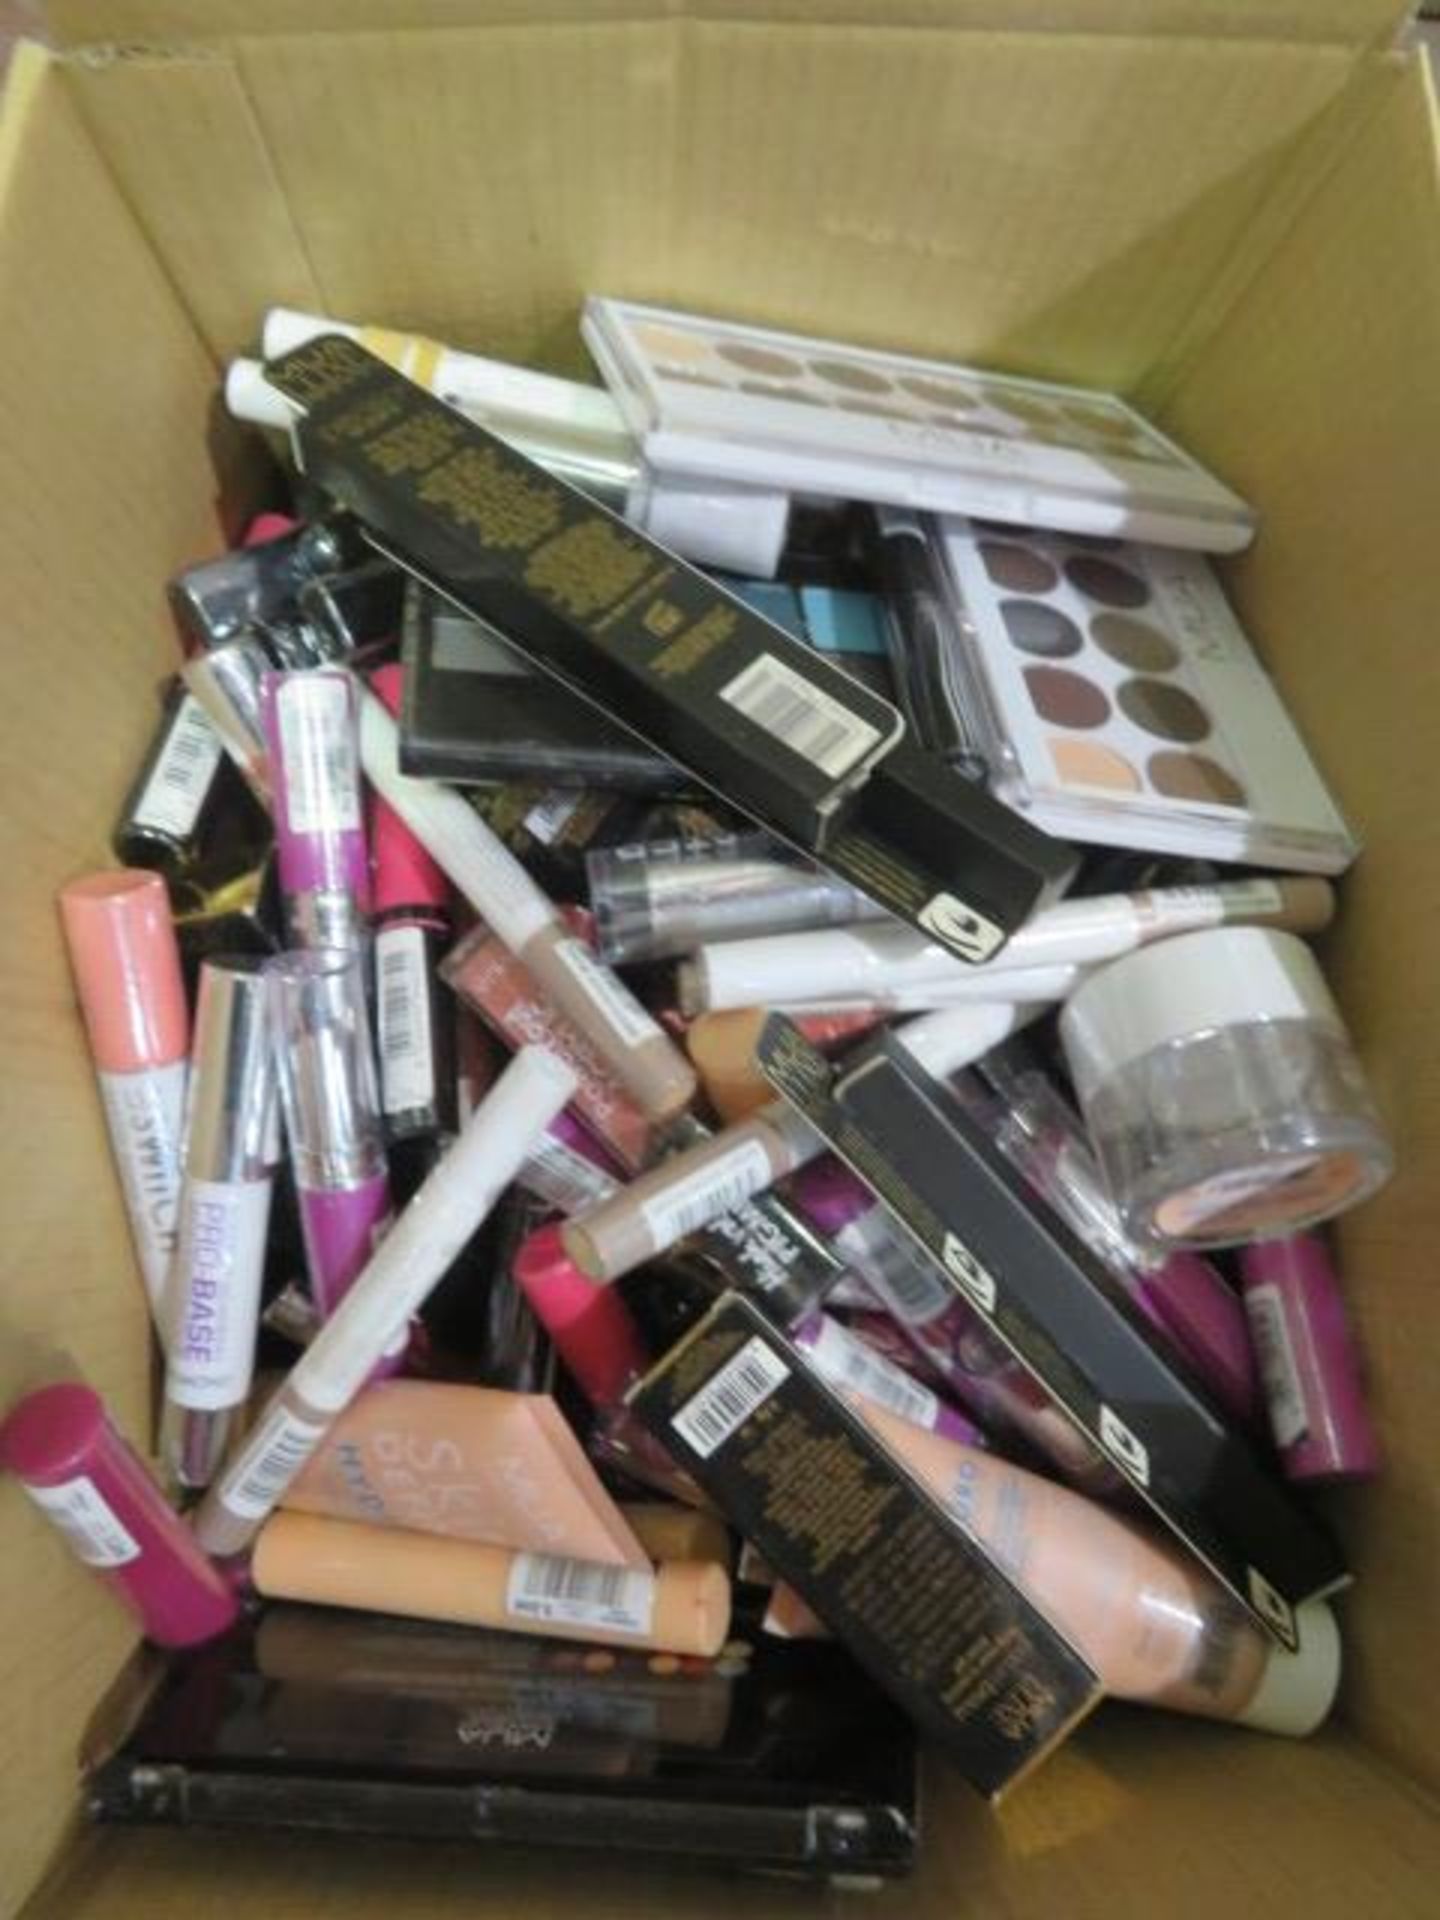 Circa. 200 items of various new make up acadamy make up to include: skin define hydro foundation,